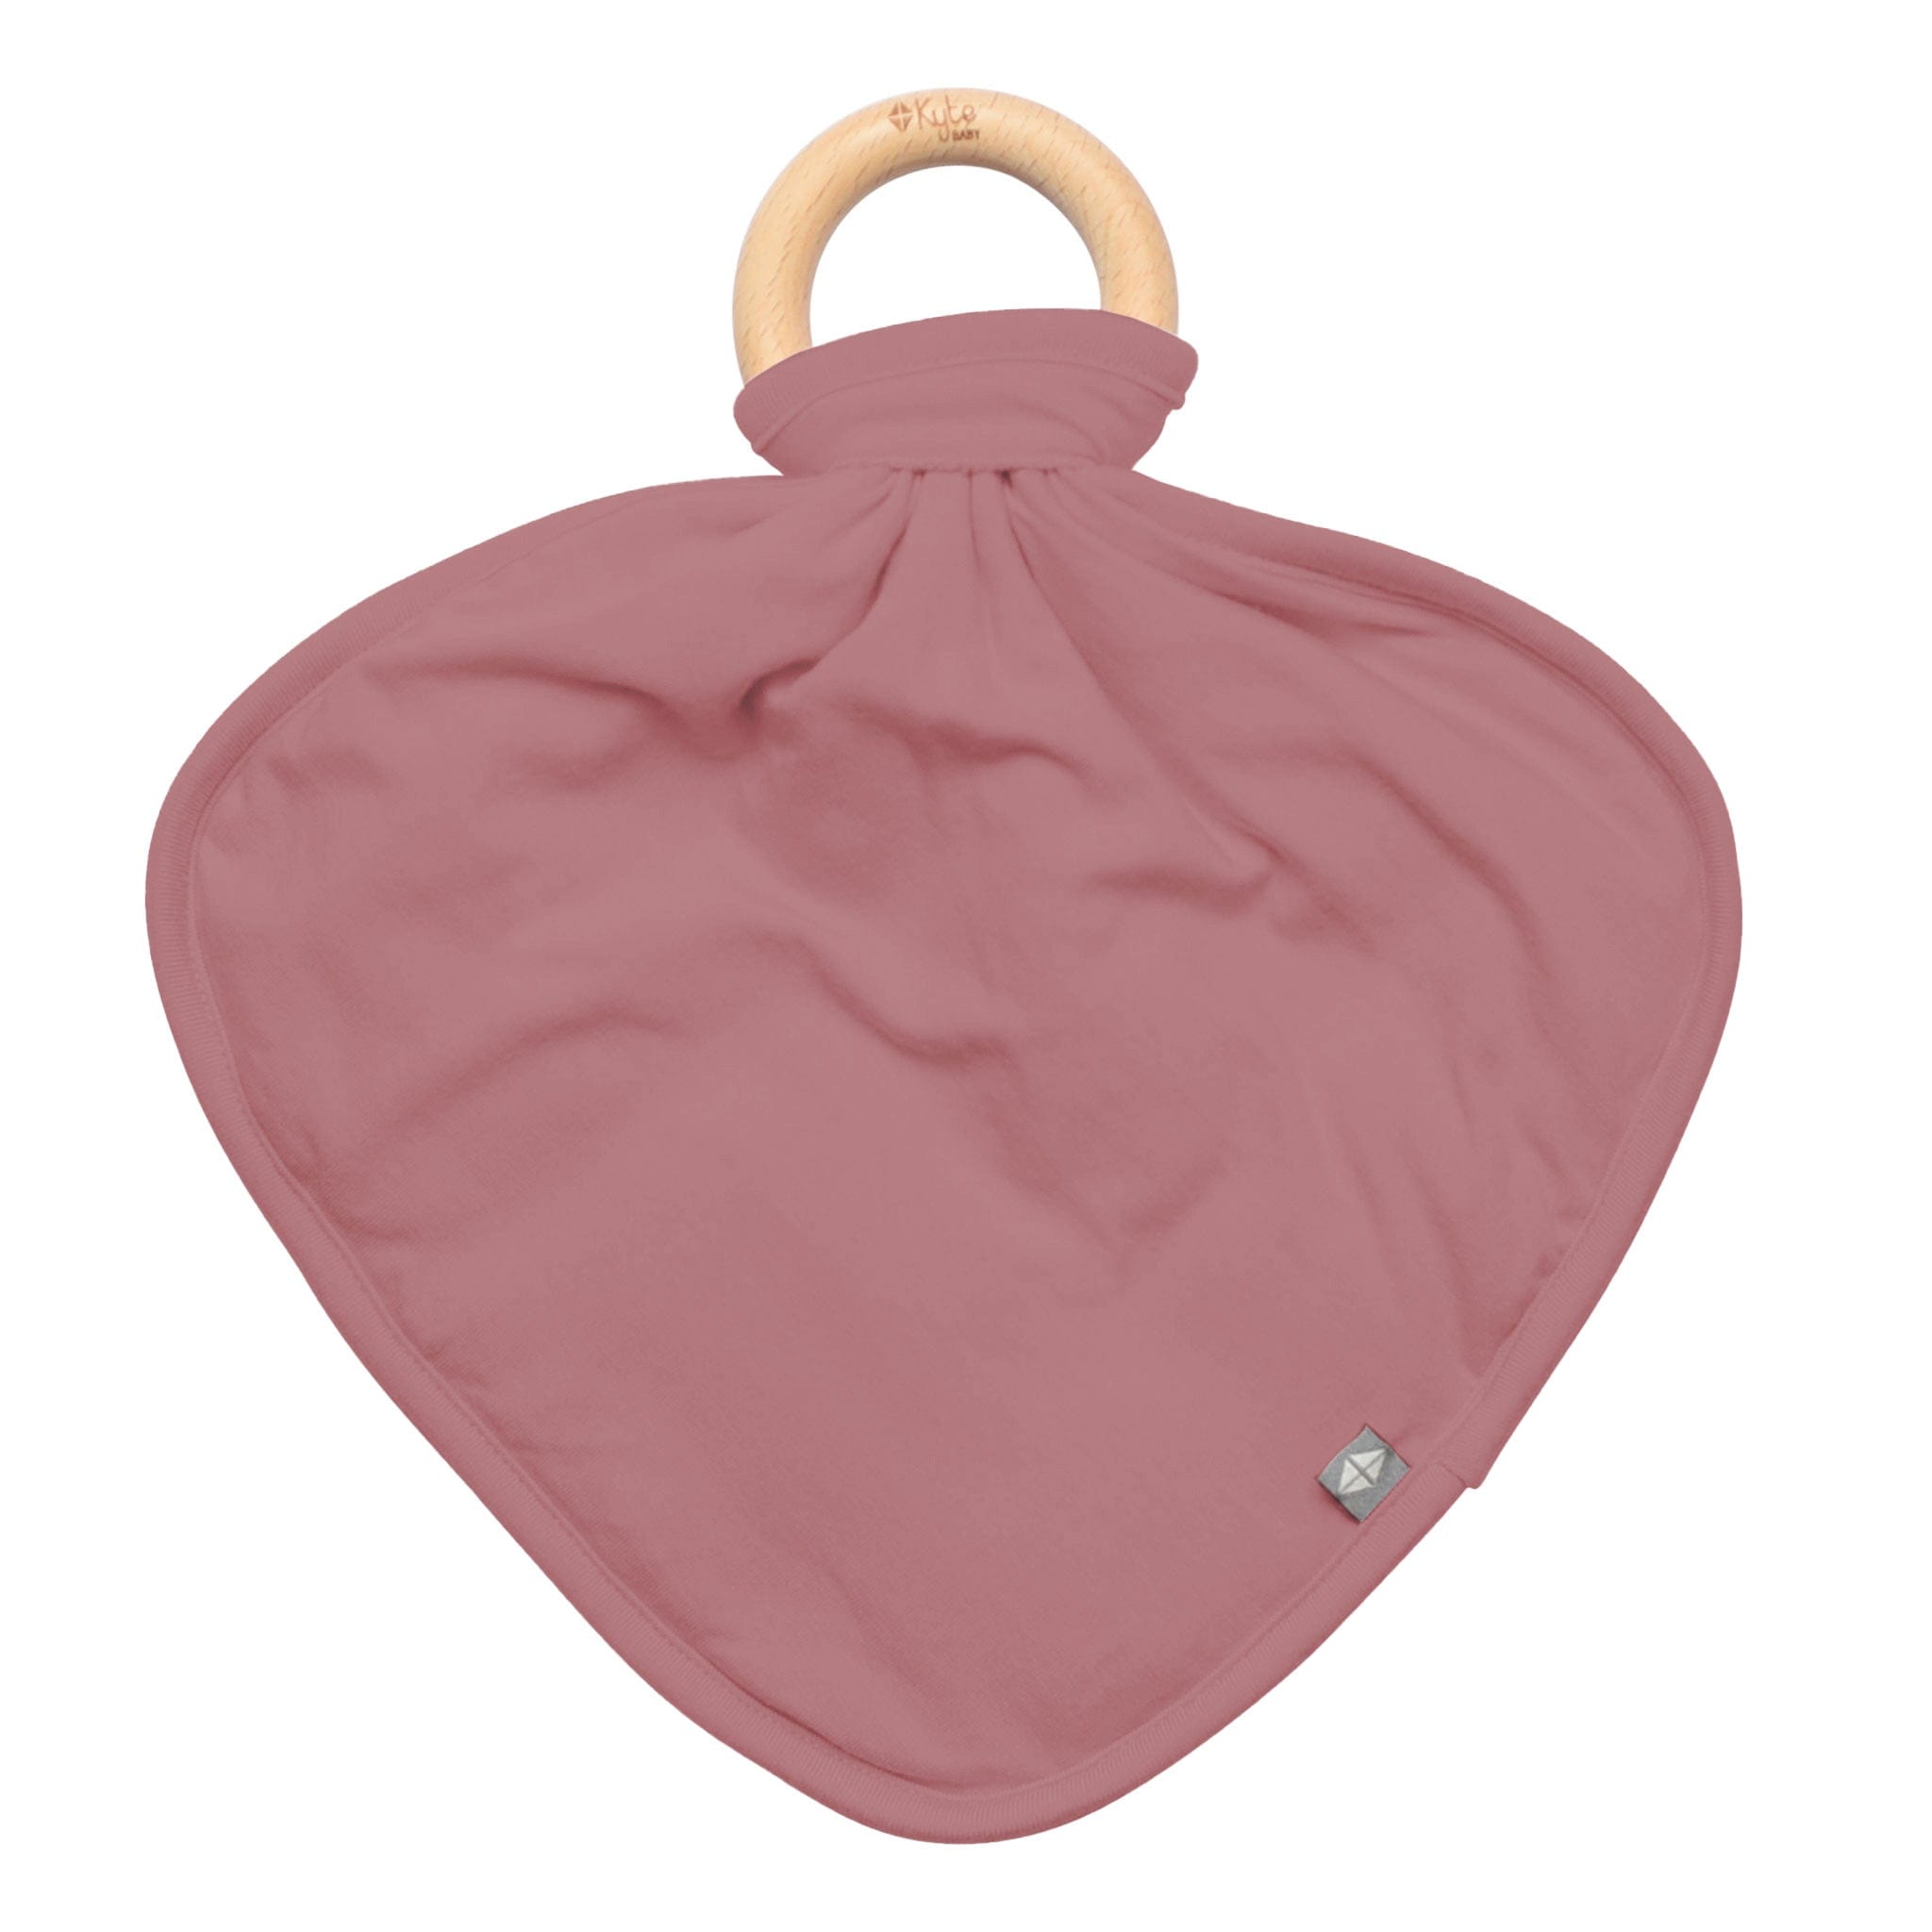 Kyte Baby Lovey Dusty Rose / Infant Lovey in Dusty Rose with Removable Teething Ring